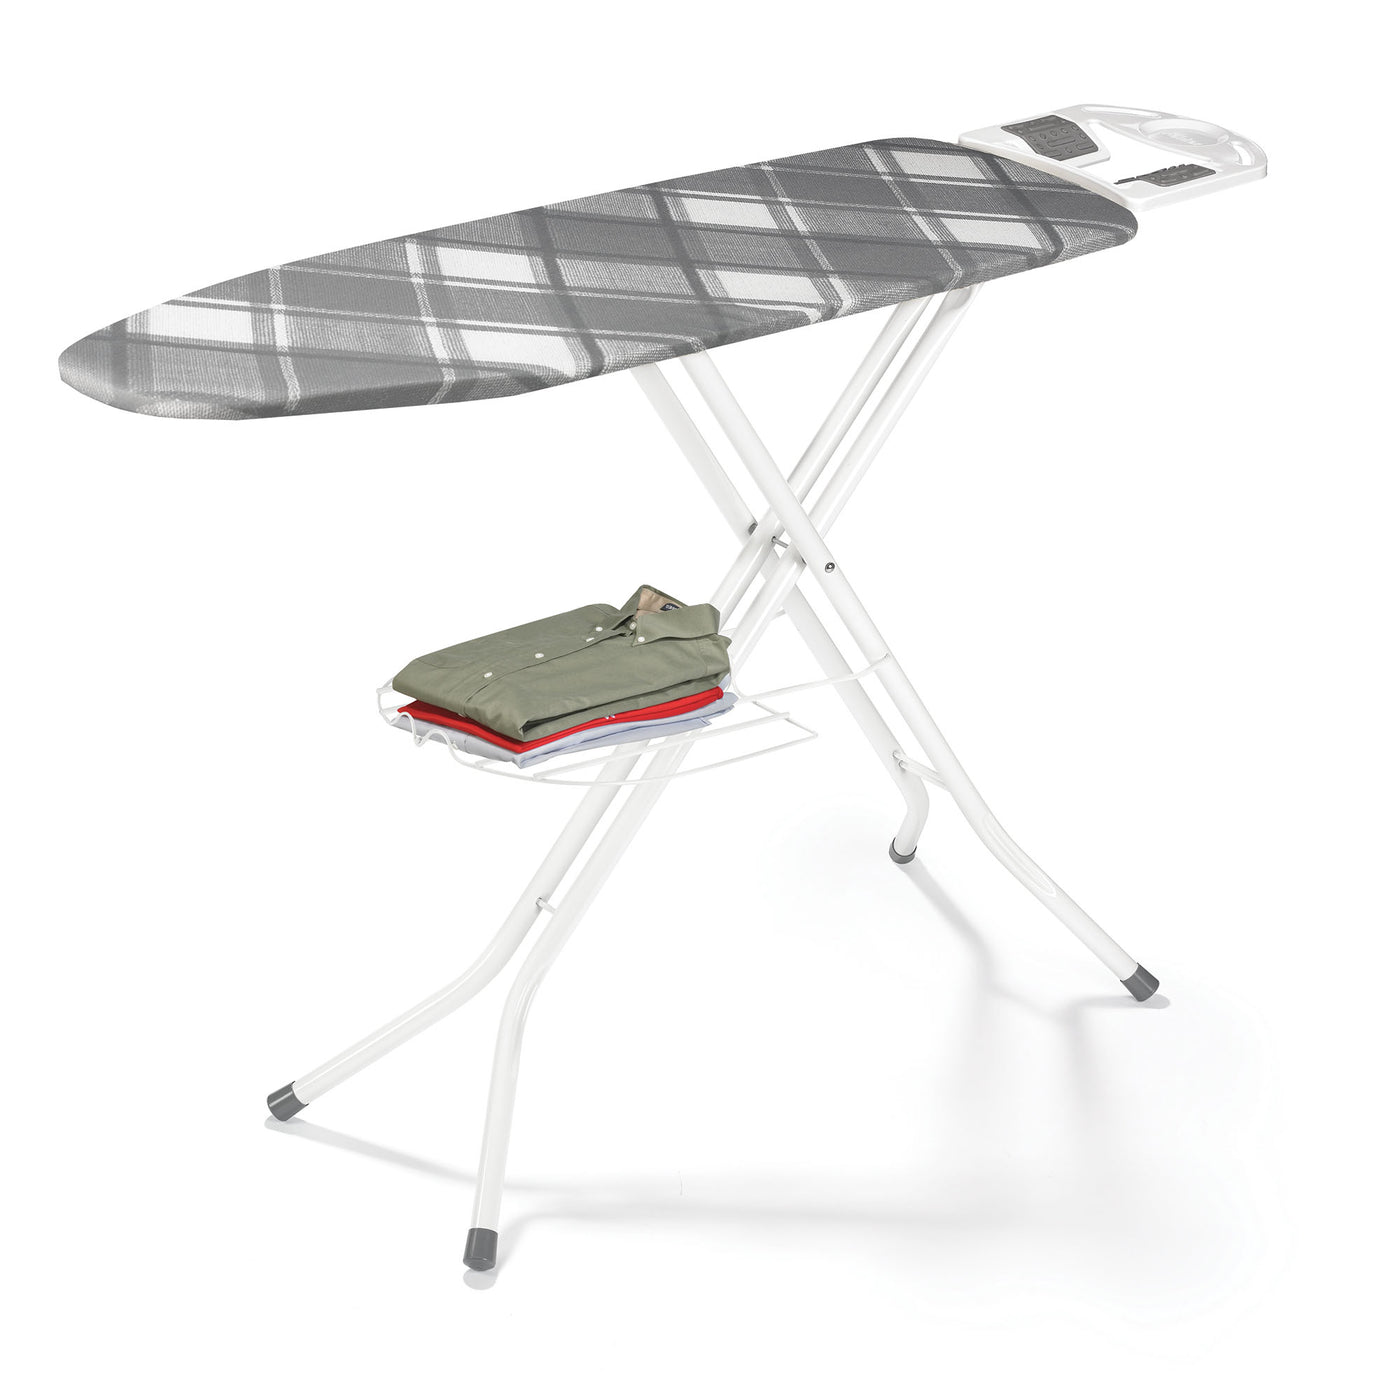 48" x 15" Deluxe Ironing Station